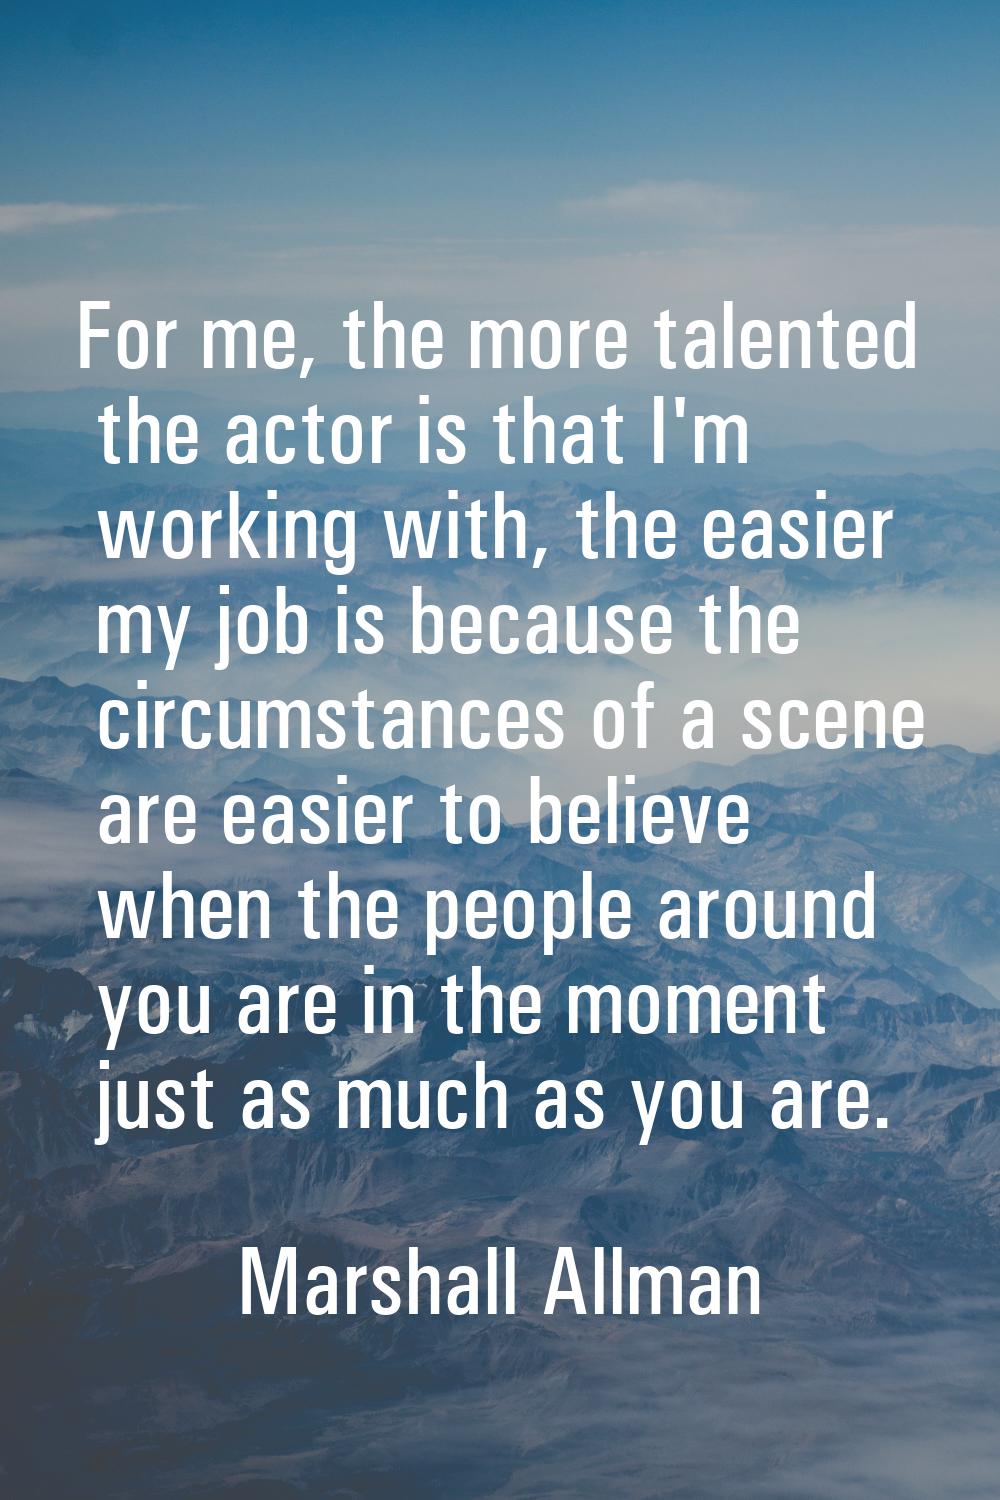 For me, the more talented the actor is that I'm working with, the easier my job is because the circ